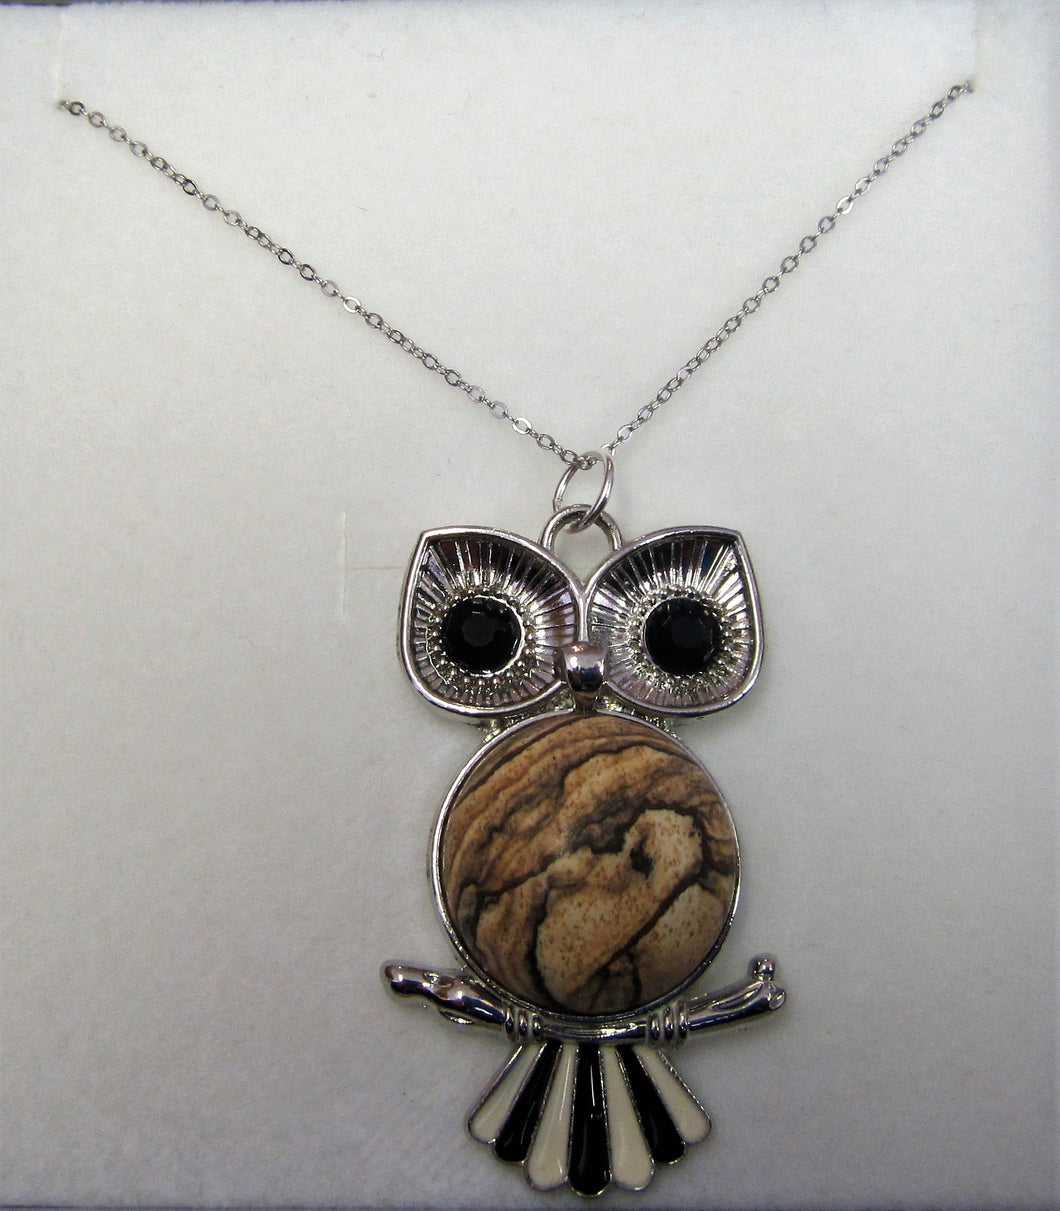 Beautiful handcrafted sterling silver necklace with Jasper owl pendant